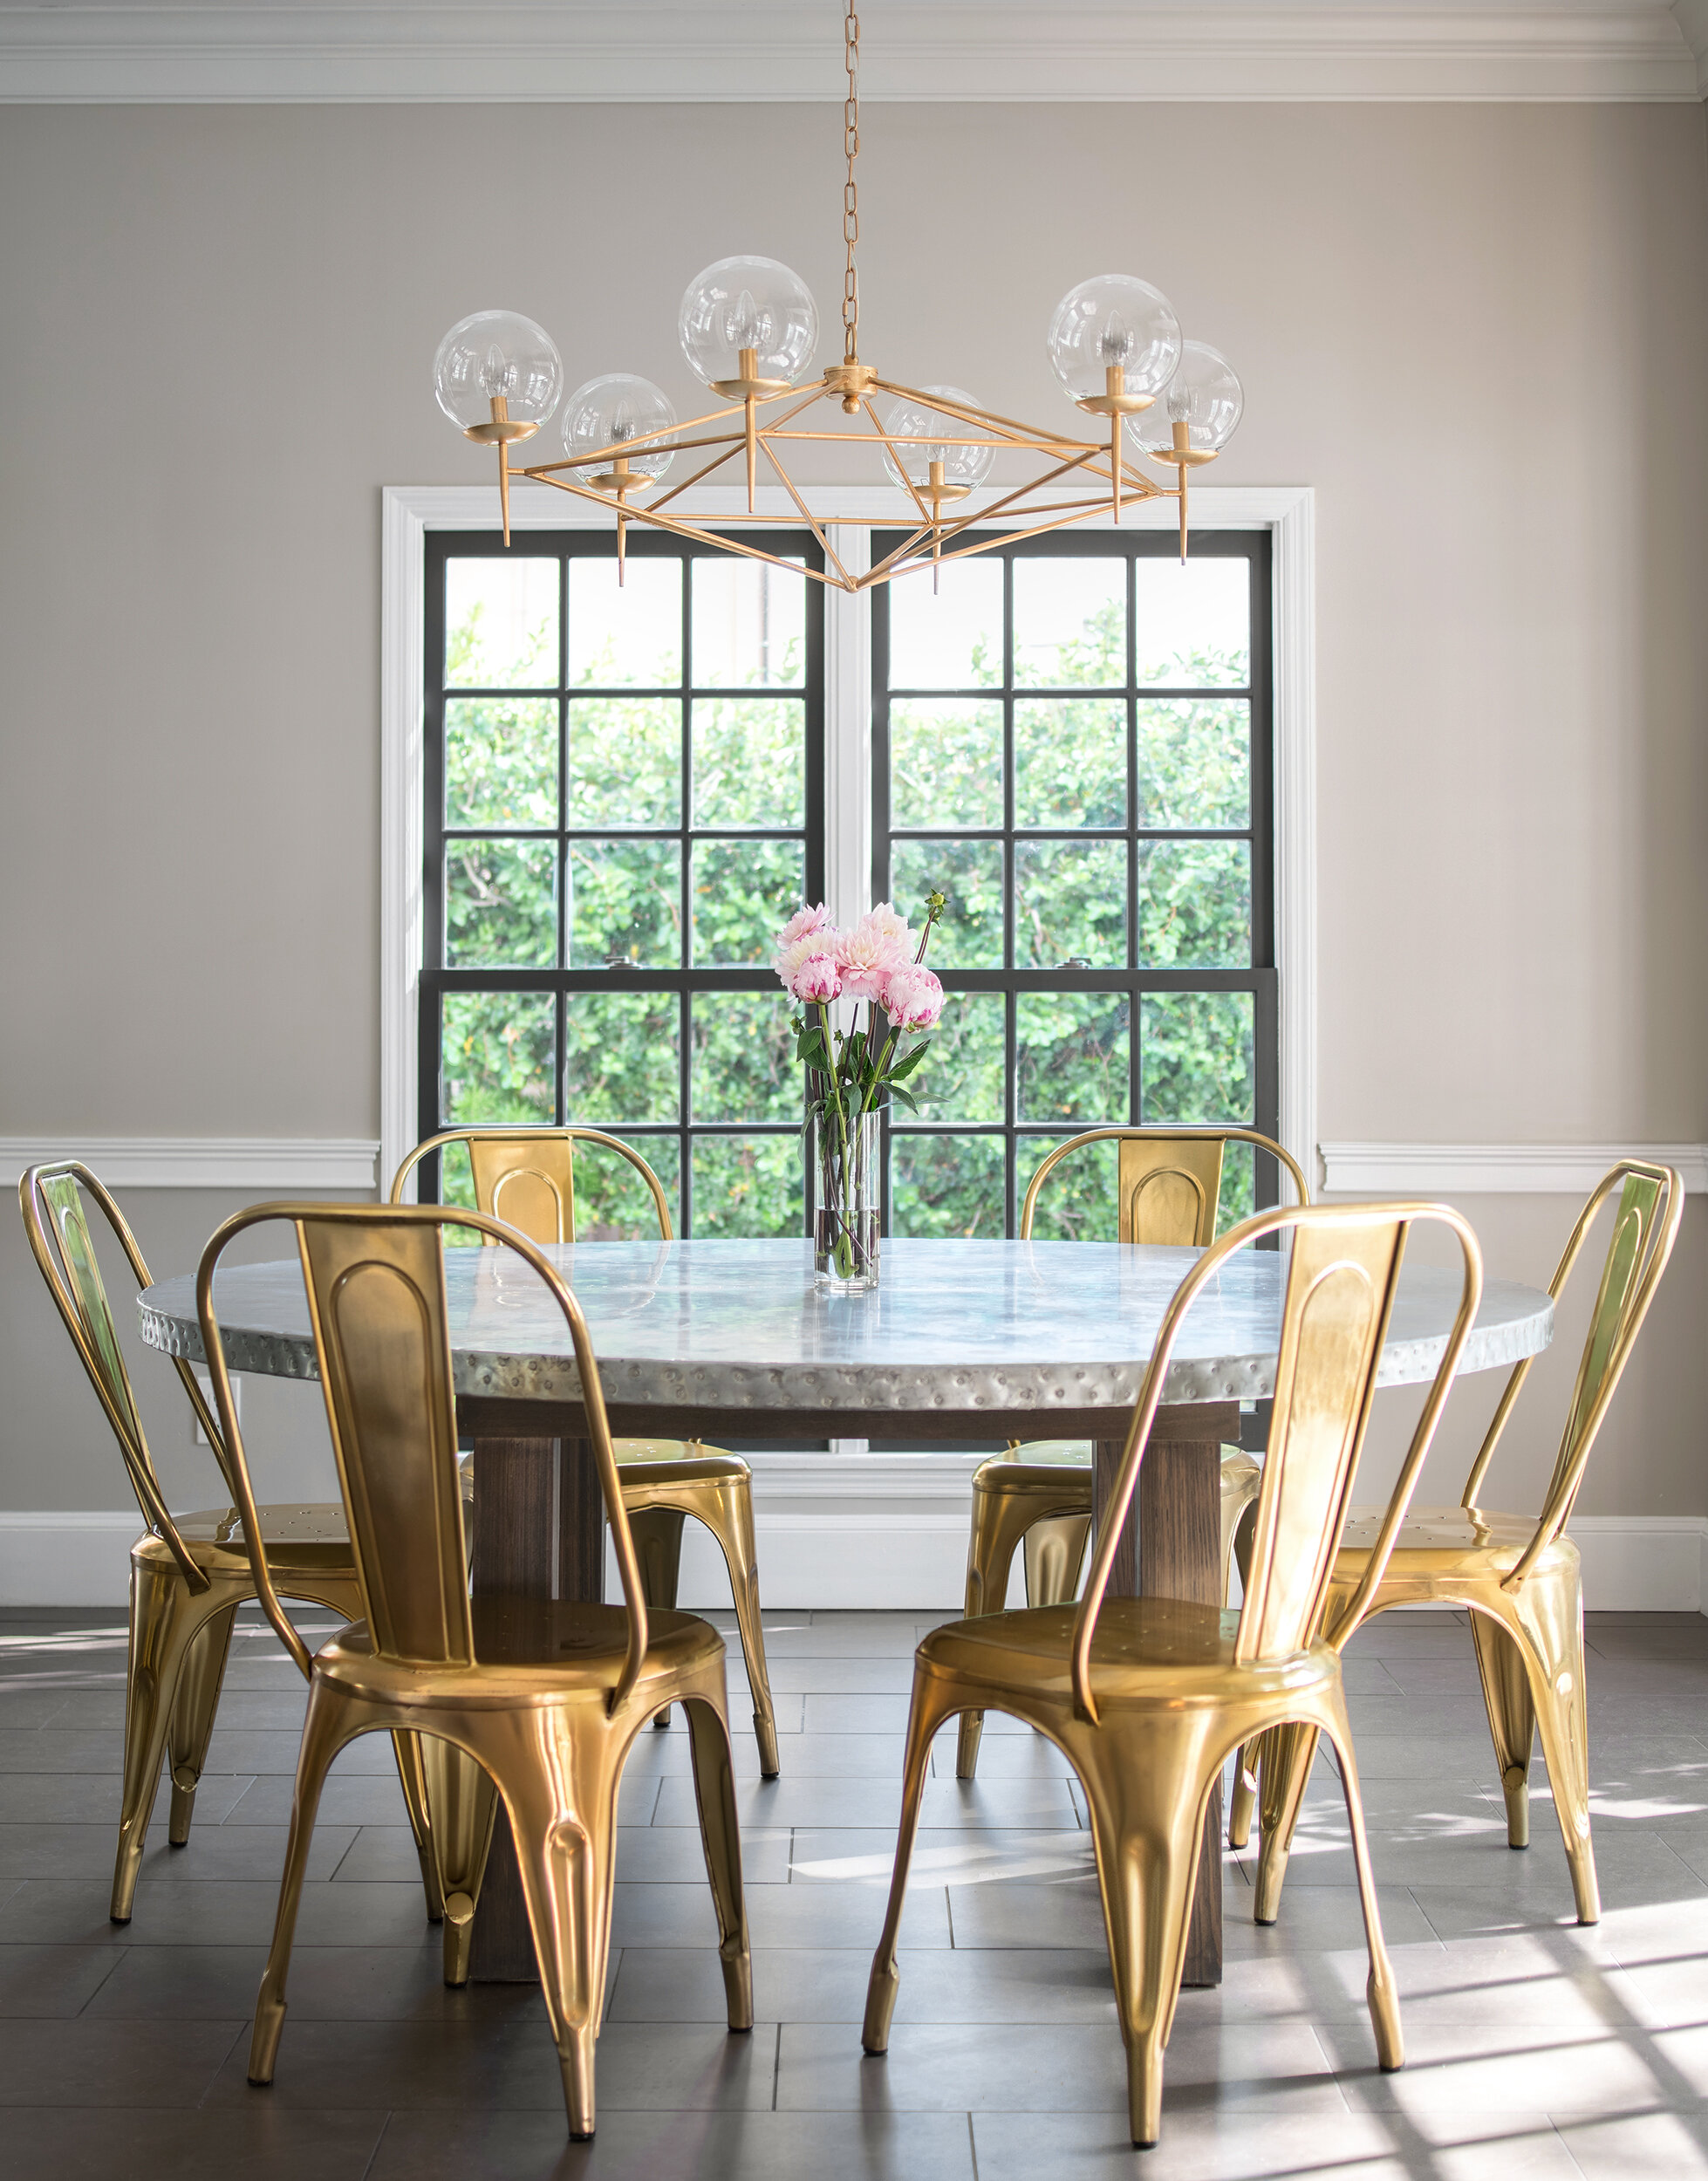 breakfast nook round table with yellow chairs and ball chandelier